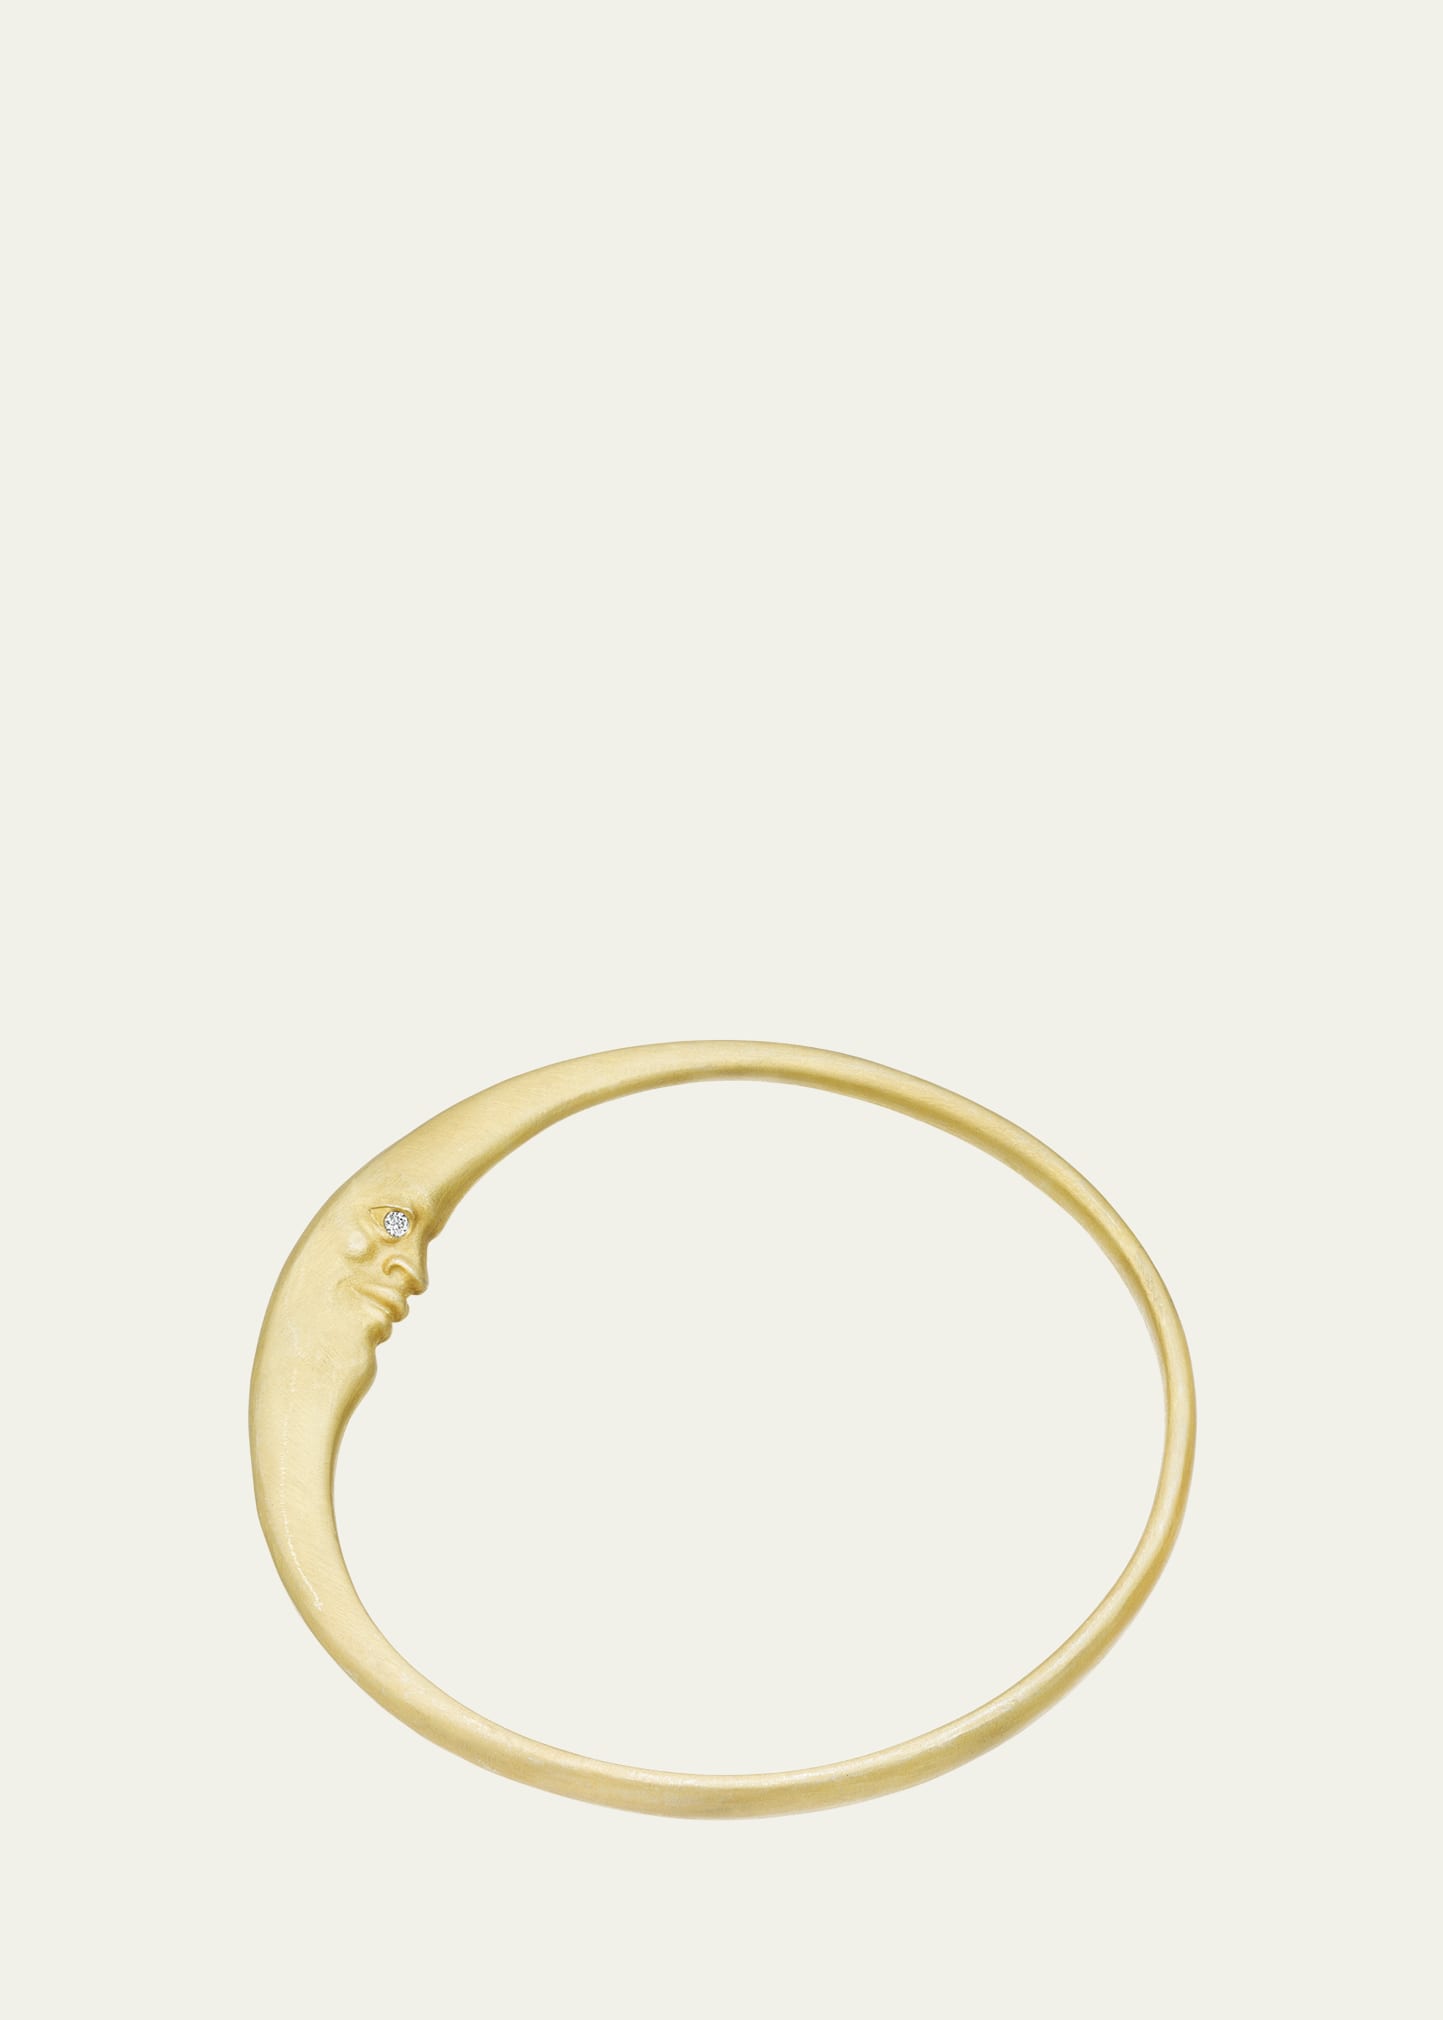 Crescent Moon Face Bangle in 18k Gold and Diamonds